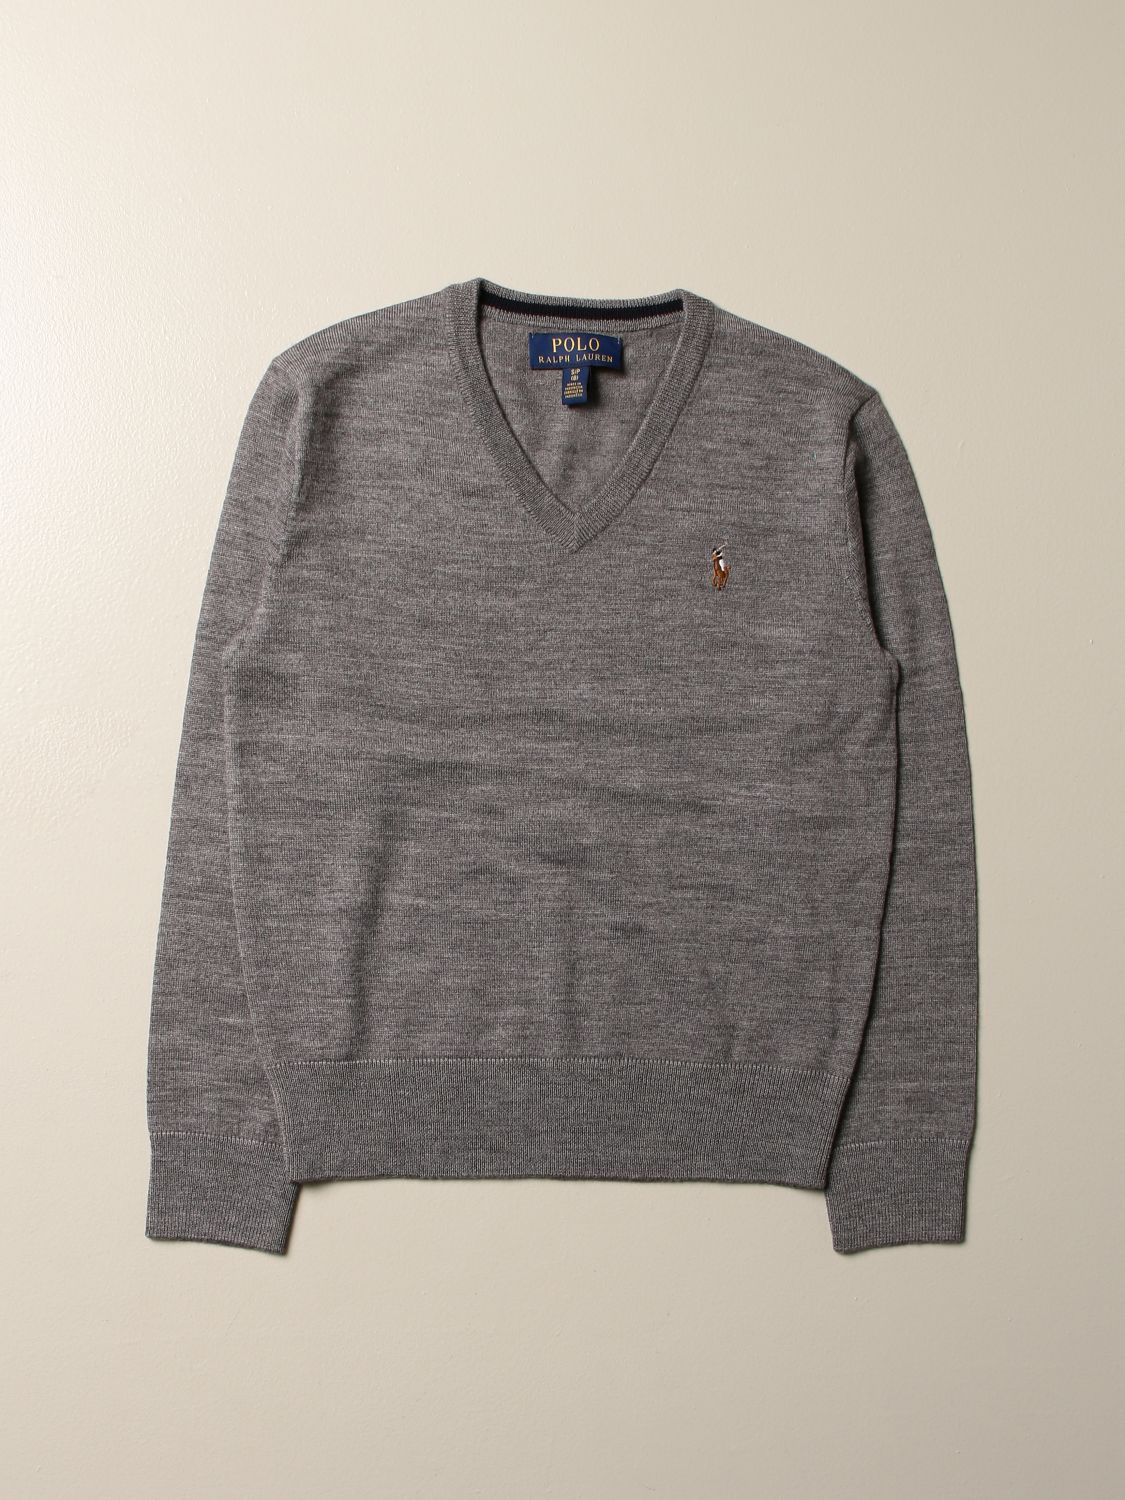 Polo Ralph Lauren Boy Outlet: v-neck sweater with logo - Grey | Polo Ralph  Lauren Boy sweater 323749882 online on 